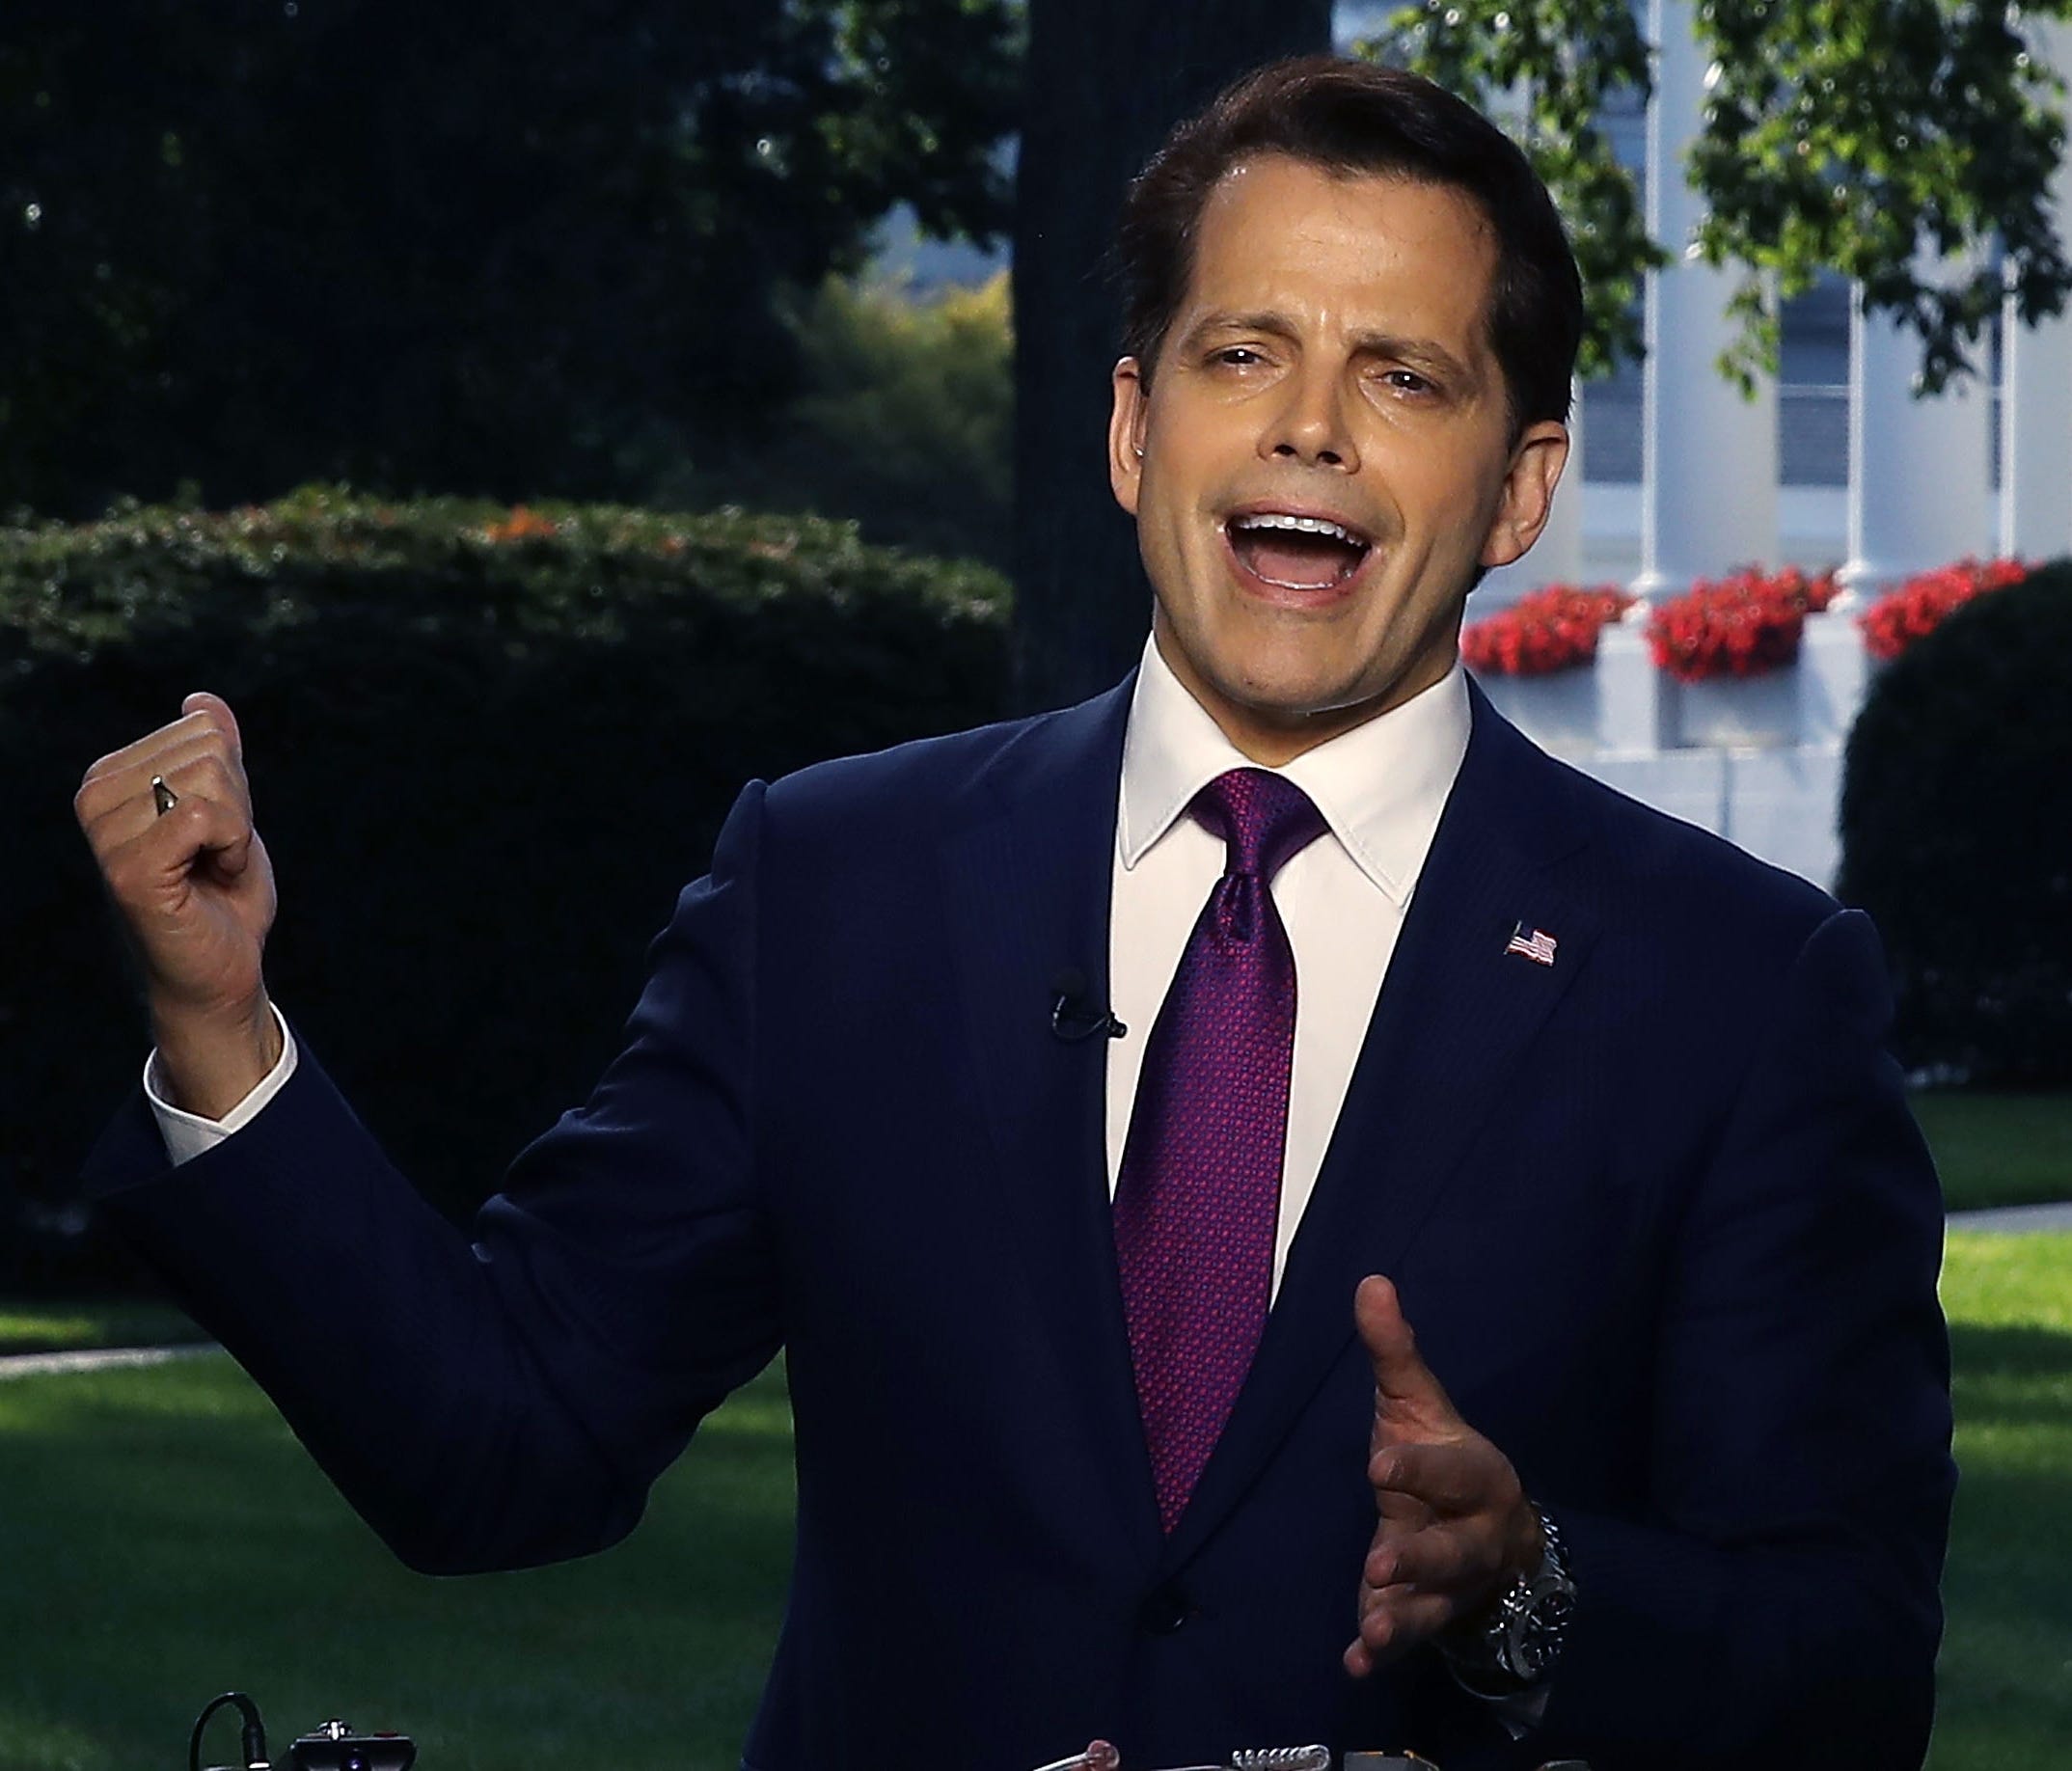 White House Communications Director Anthony Scaramucci speaks on a morning television show, from the north lawn of the White House on July 26, 2017 in Washington, D.C.  (